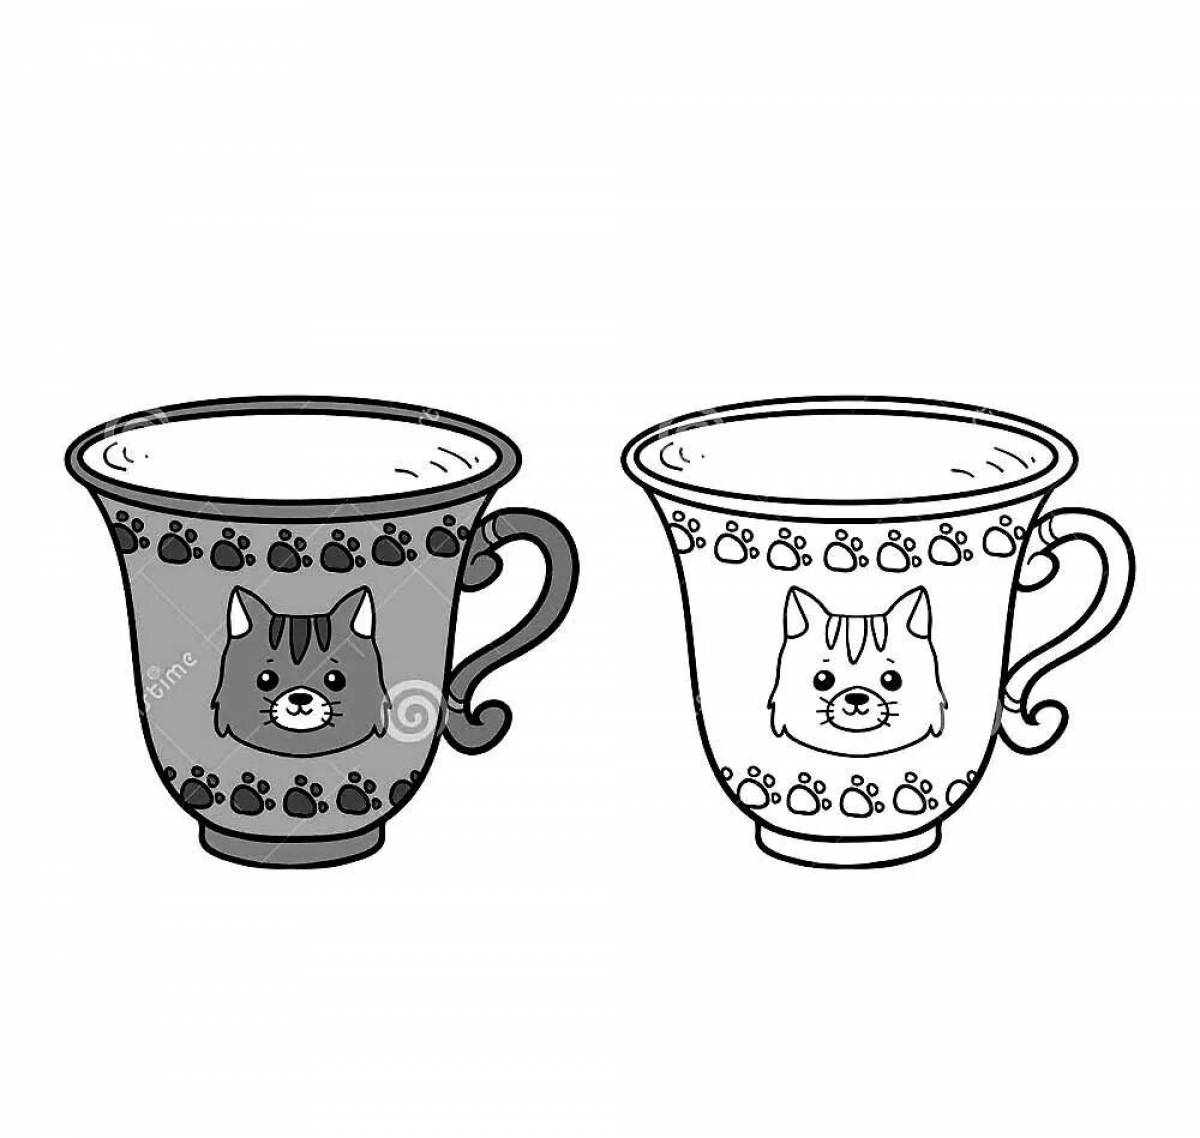 Coloring complex mugs and cups